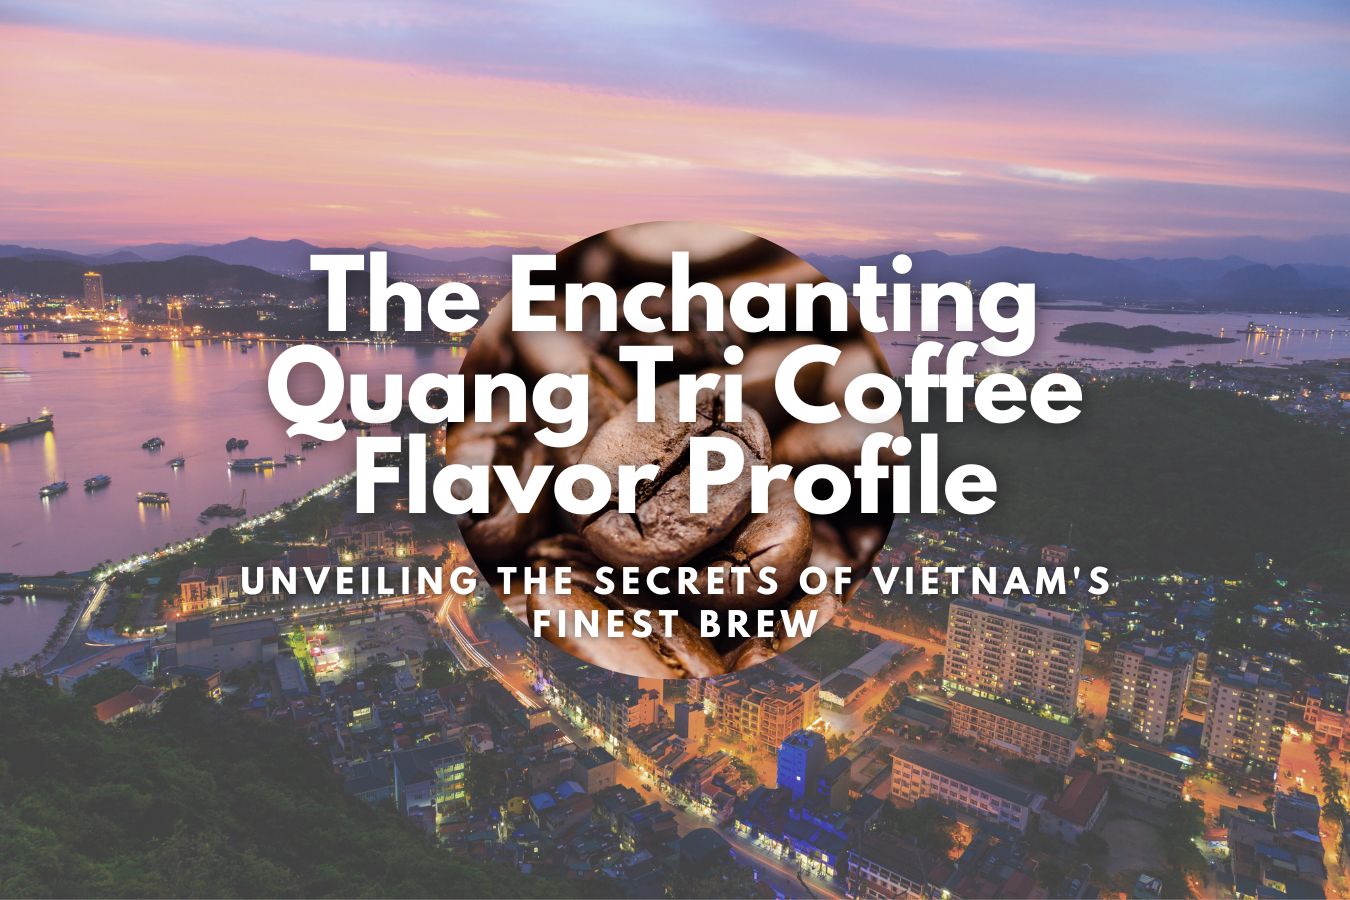 The Enchanting Quang Tri Coffee Flavor Profile: Unveiling the Secrets of Vietnam's Finest Brew